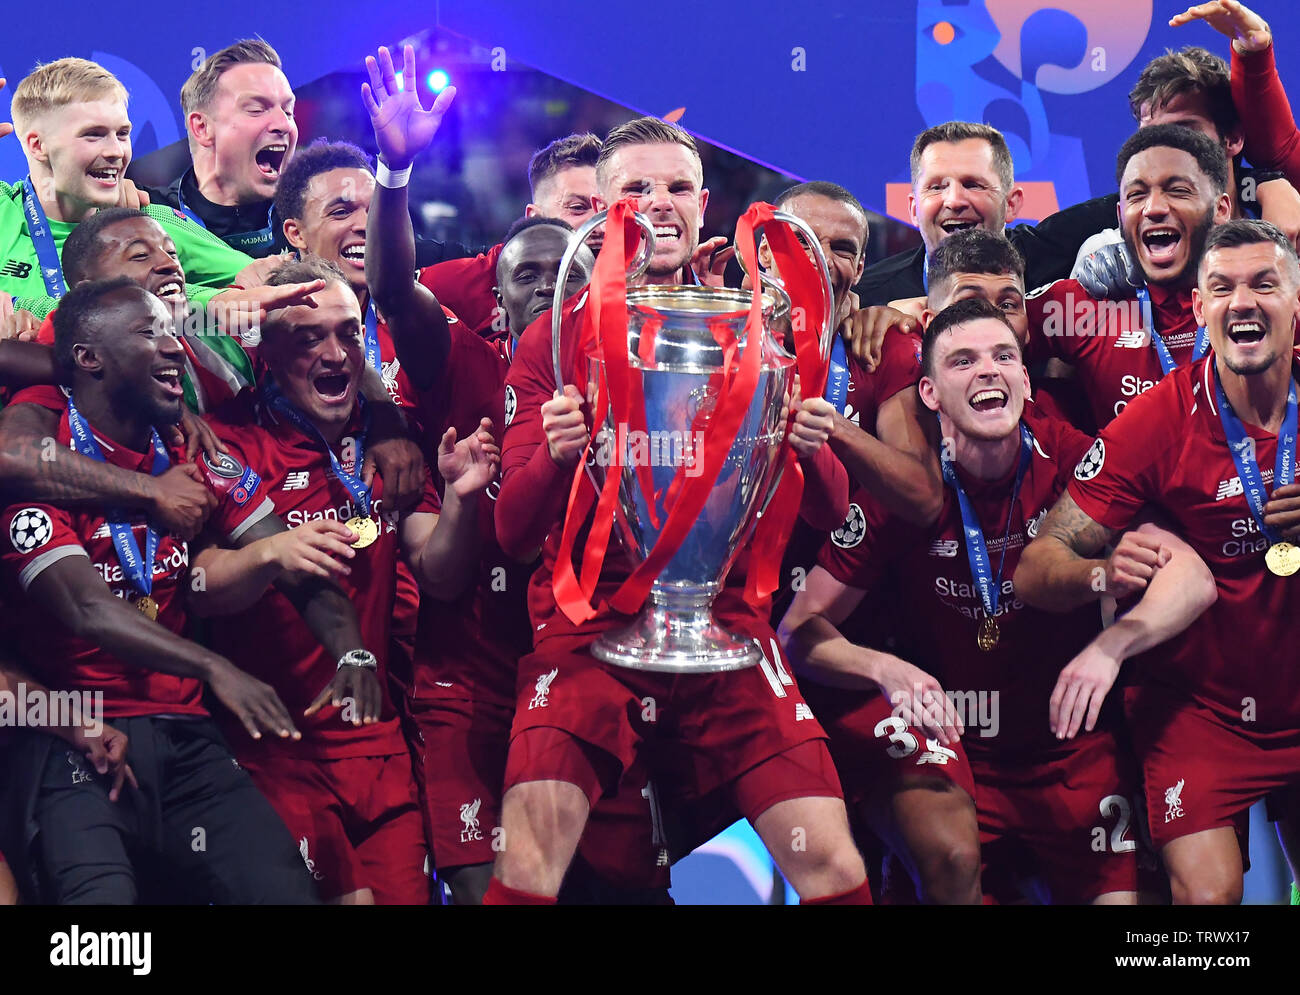 MADRID, SPAIN - JUNE 1, 2019: Jordan Henderson of Liverpool lifts the trophy during the award ceremony held after the 2018/19 UEFA Champions League Final between Tottenham Hotspur (England) and Liverpool FC (England) at Wanda Metropolitano. Stock Photo